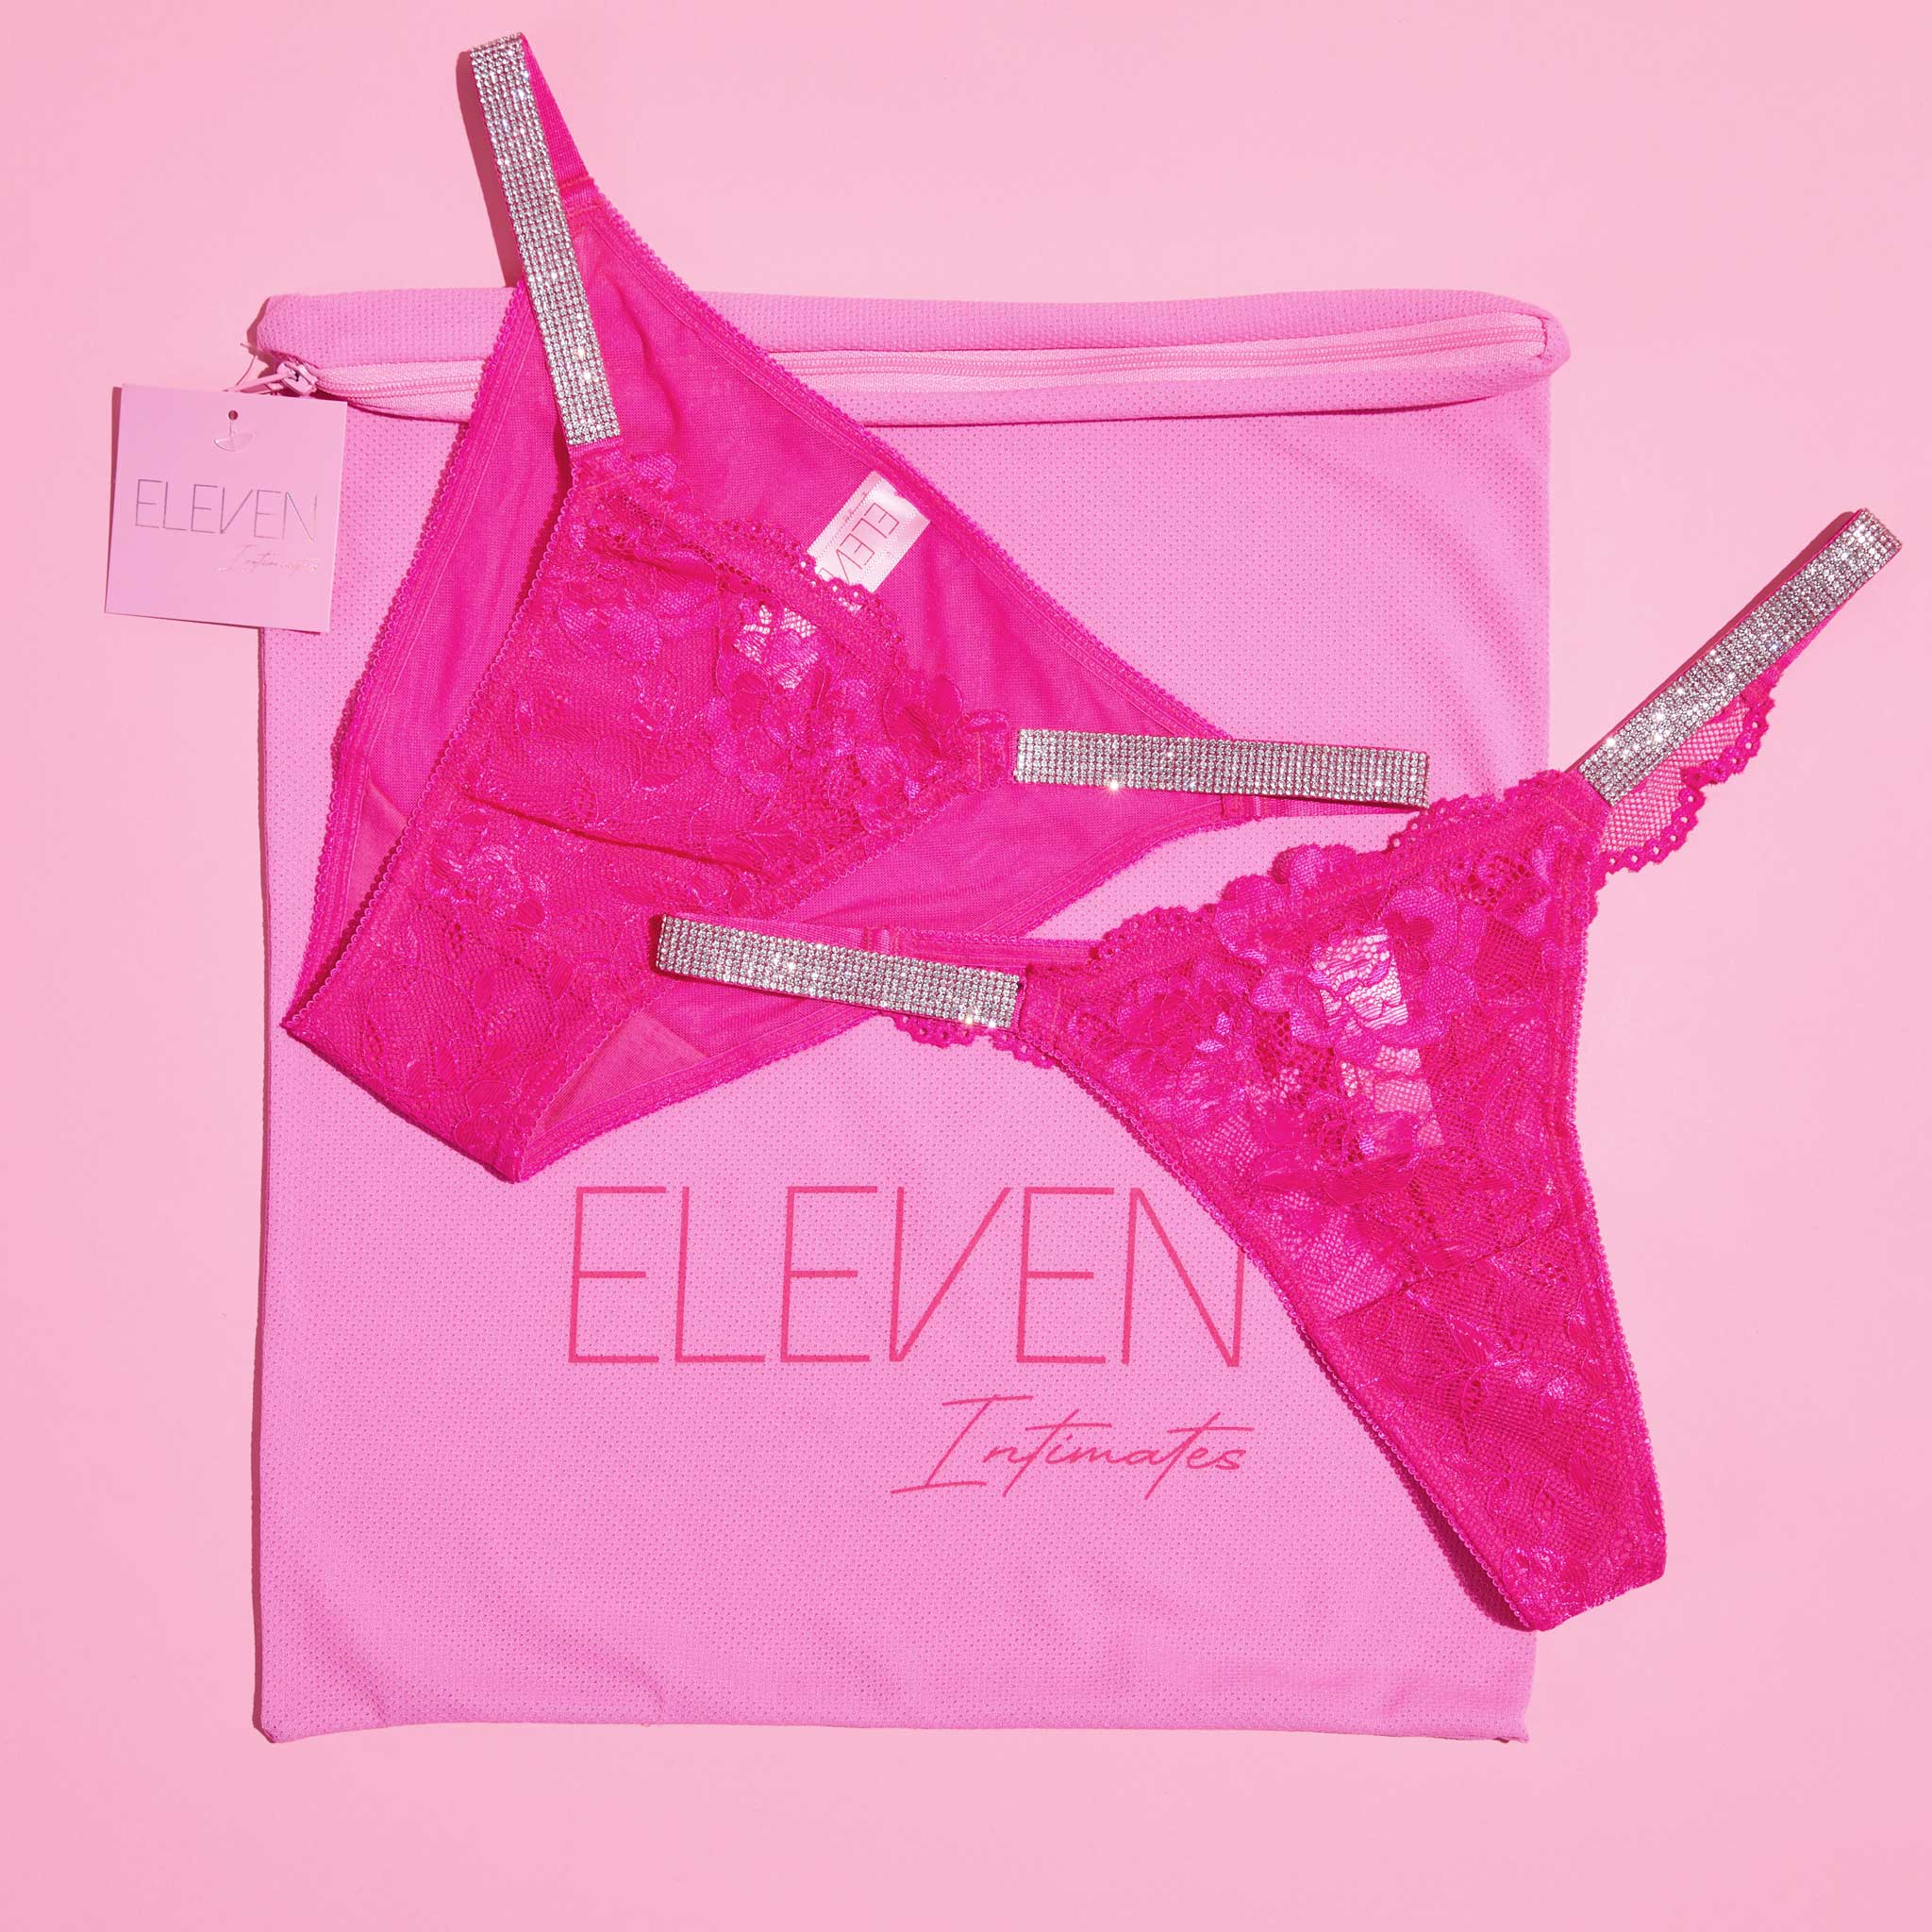 Victoria's Secret Lace V-String Panty Pink and 11 similar items